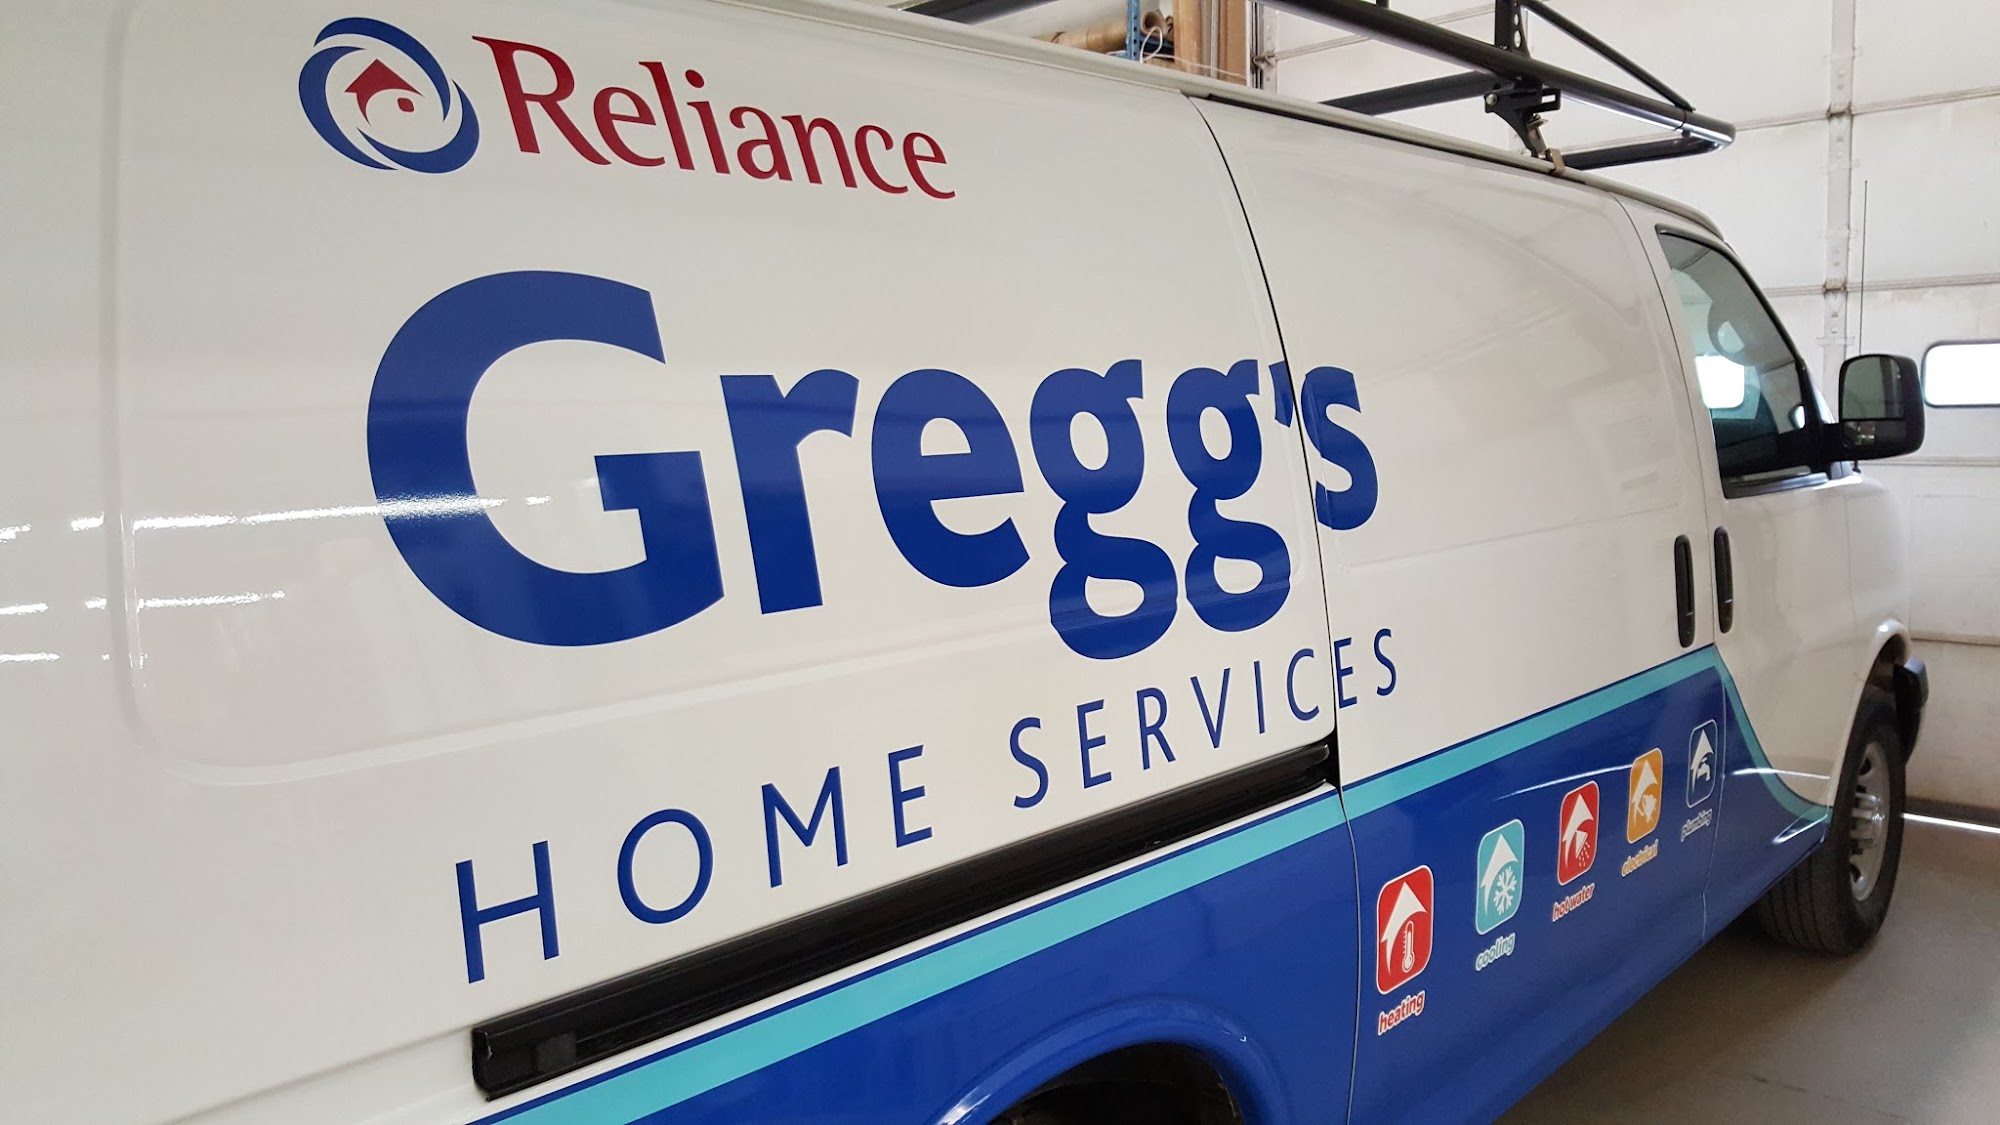 Reliance Gregg's Heating, Air Conditioning & Plumbing